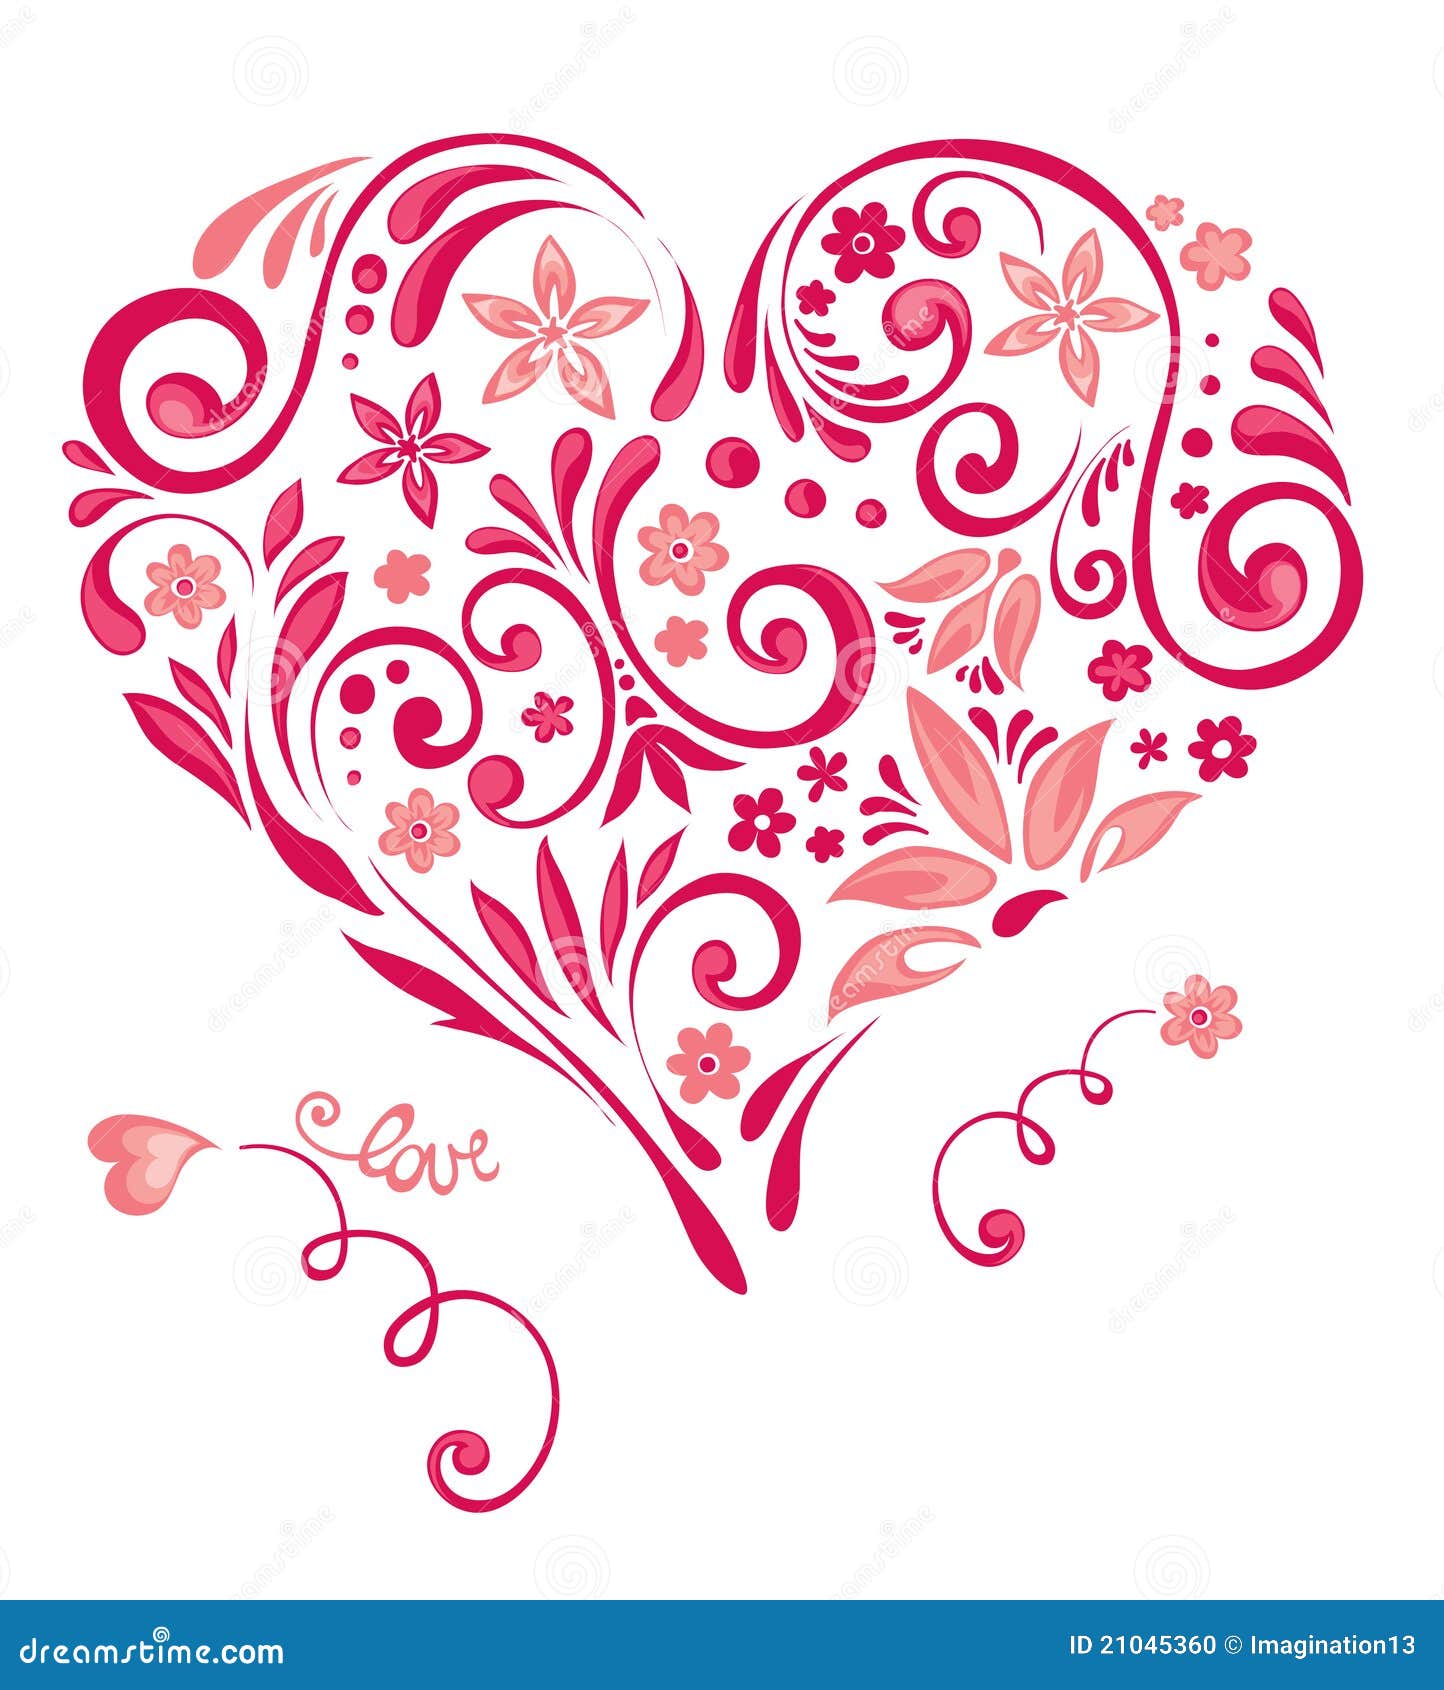 free abstract heart clipart - photo #41